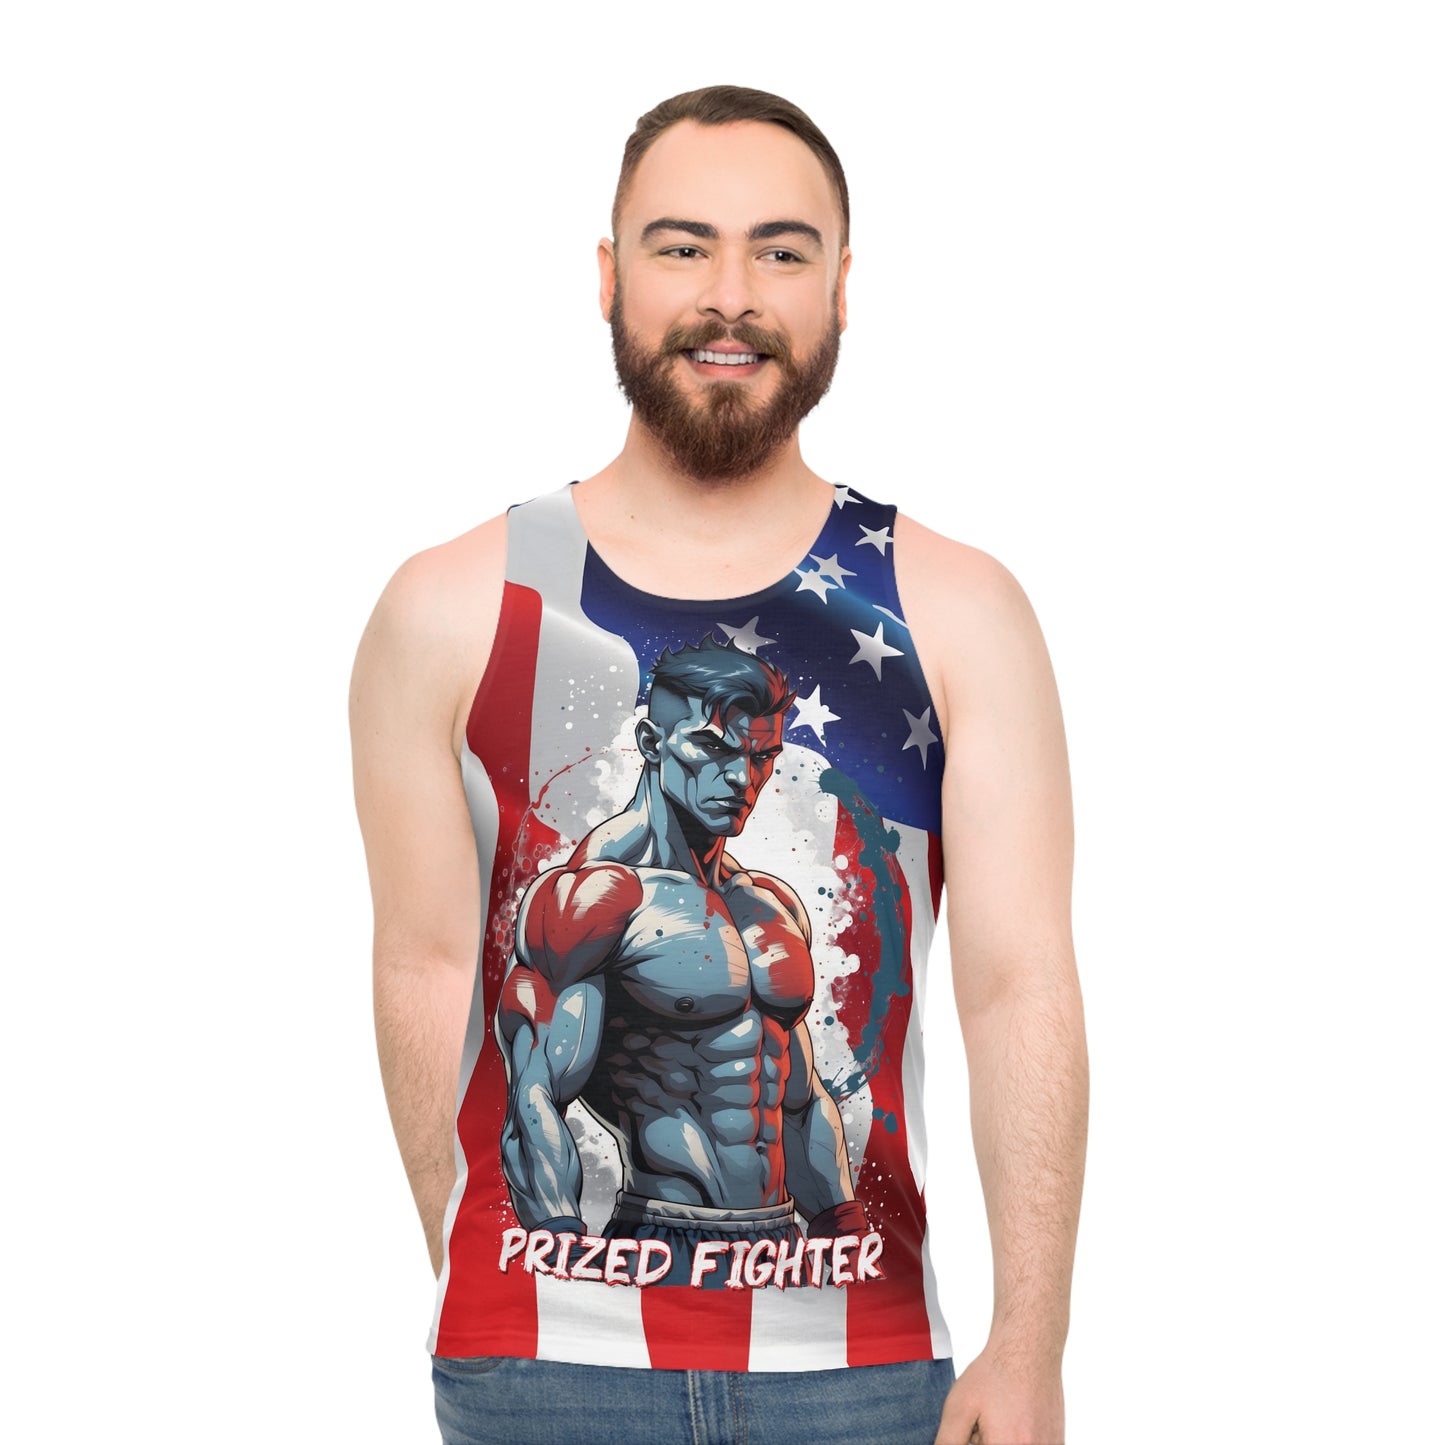 Kǎtōng Piàn - Prized Fighter Collection - America - 003 - Unisex Tank Top